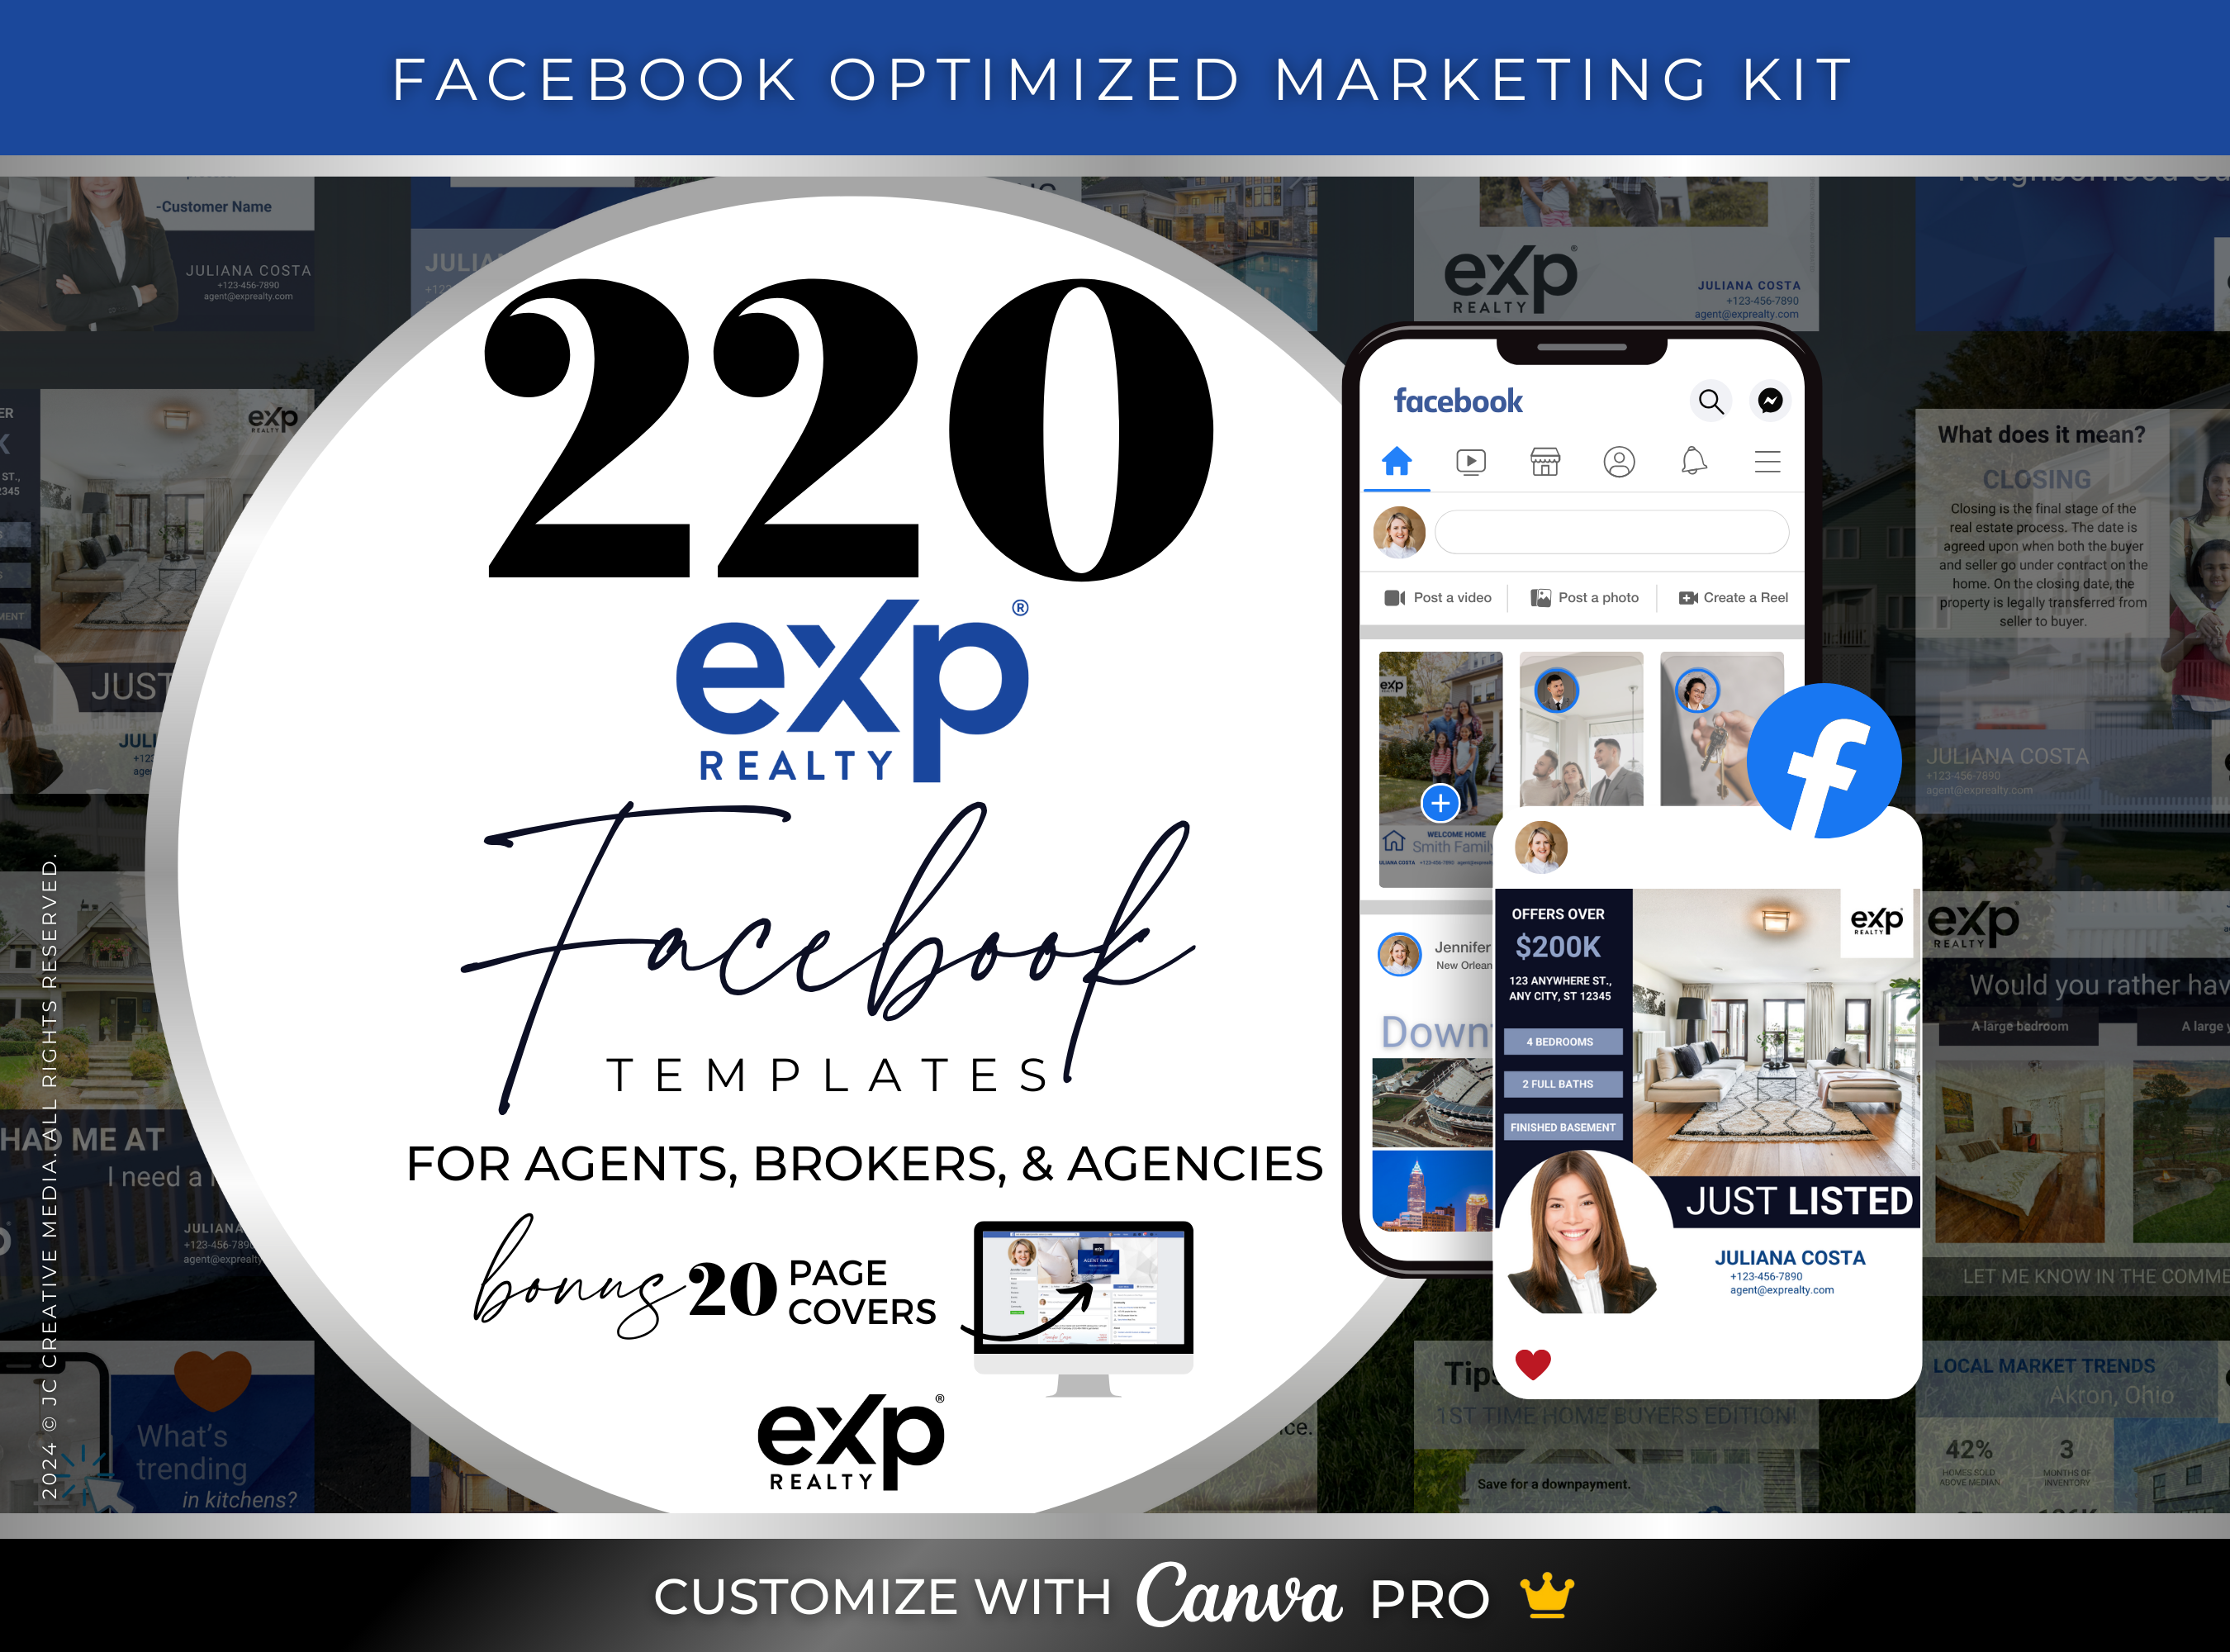 eXp Canva Templates for Real Estate Facebook Marketing and Realtor Branding